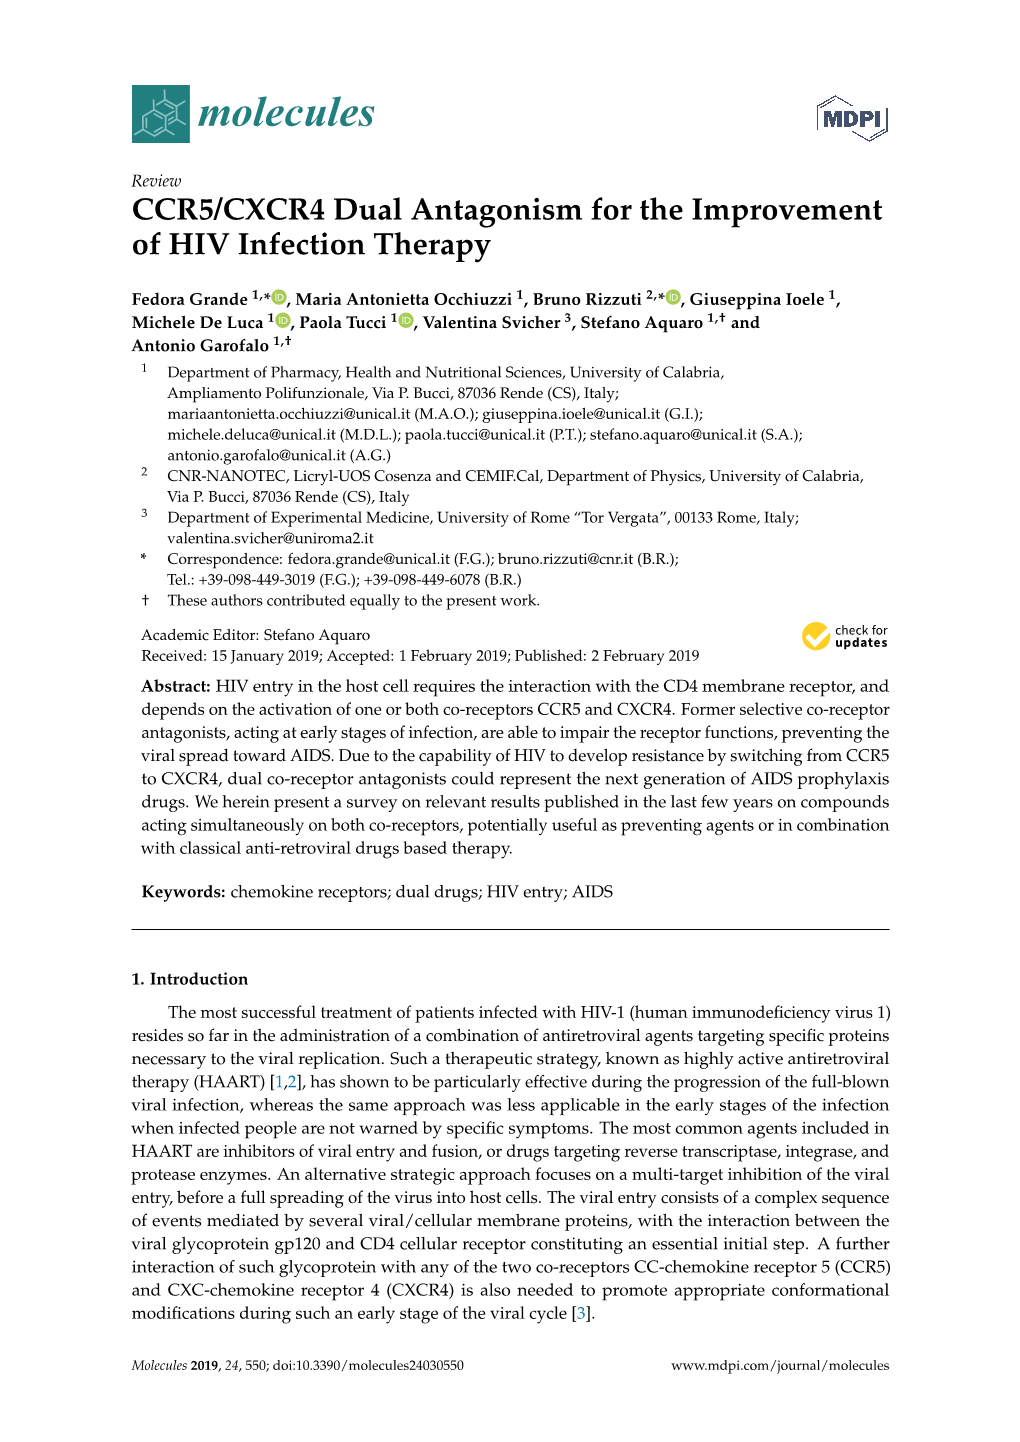 CCR5/CXCR4 Dual Antagonism for the Improvement of HIV Infection Therapy